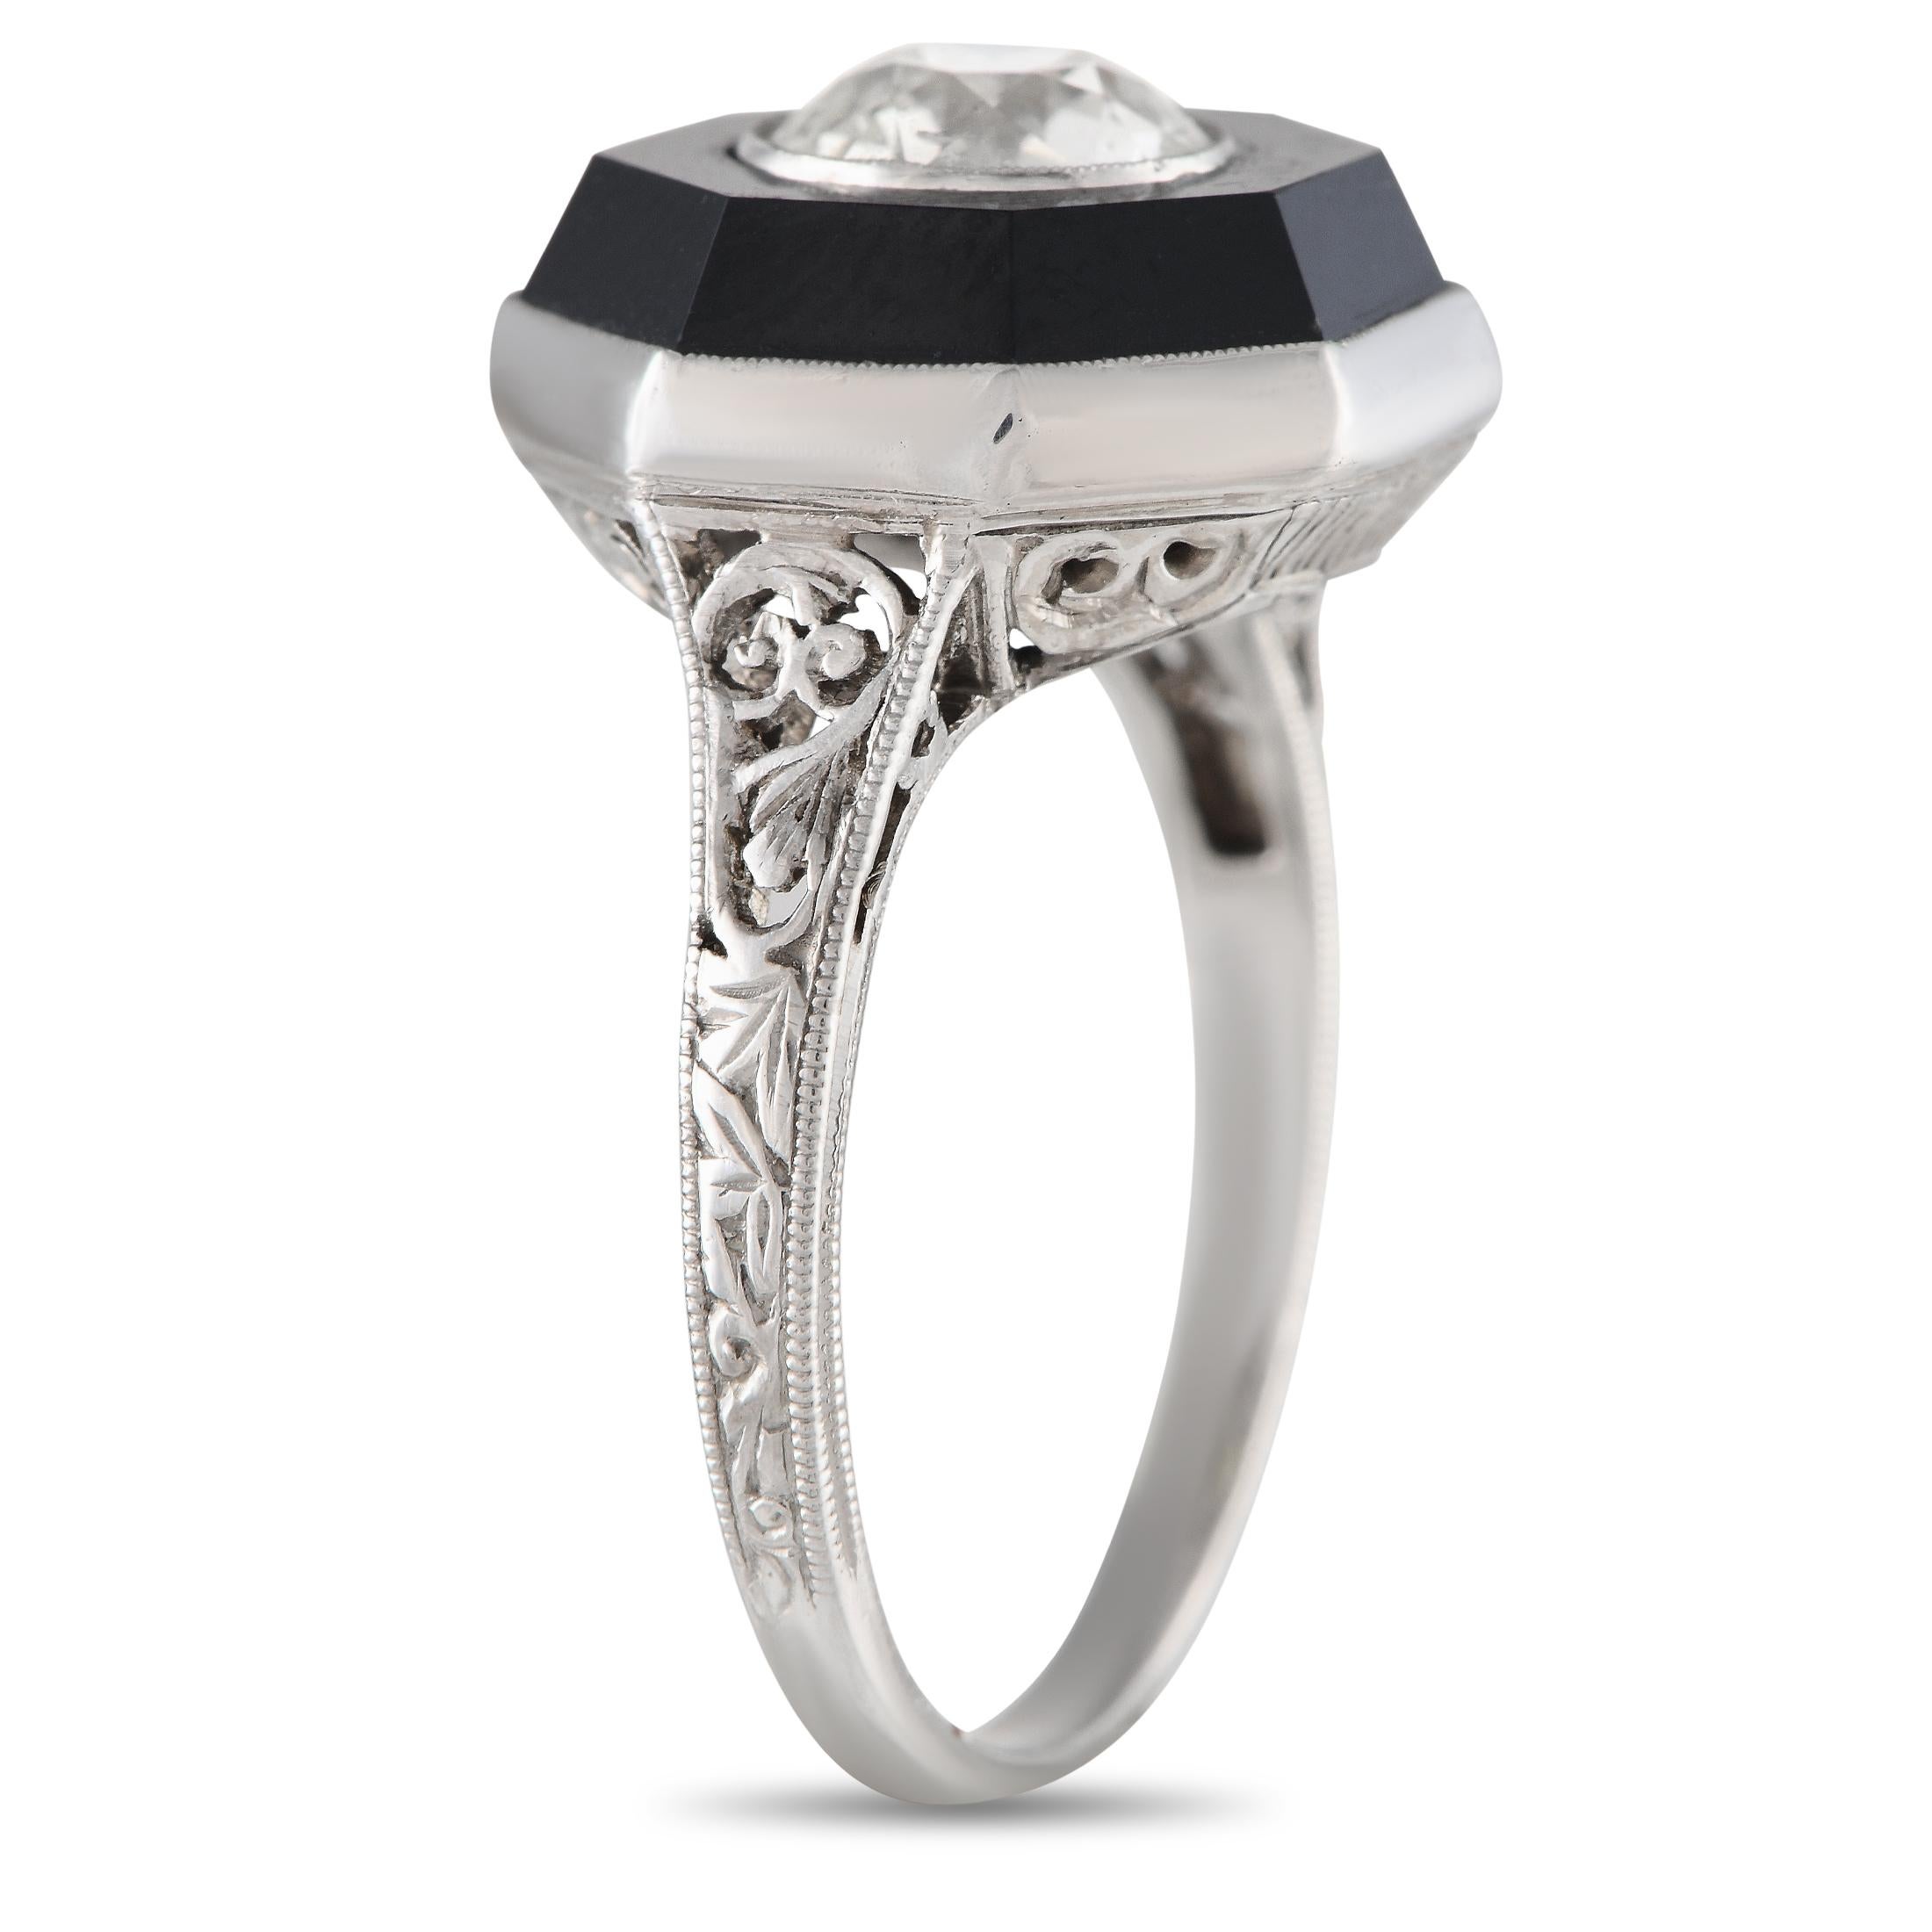 Dating back to the Art Deco era, here is an exquisite ring sure to make a dramatic style statement. It features a slim band that measures only 1mm thick. The ring's sculpted and milgrain-detailed shoulders lead to an octagonal centerpiece topped